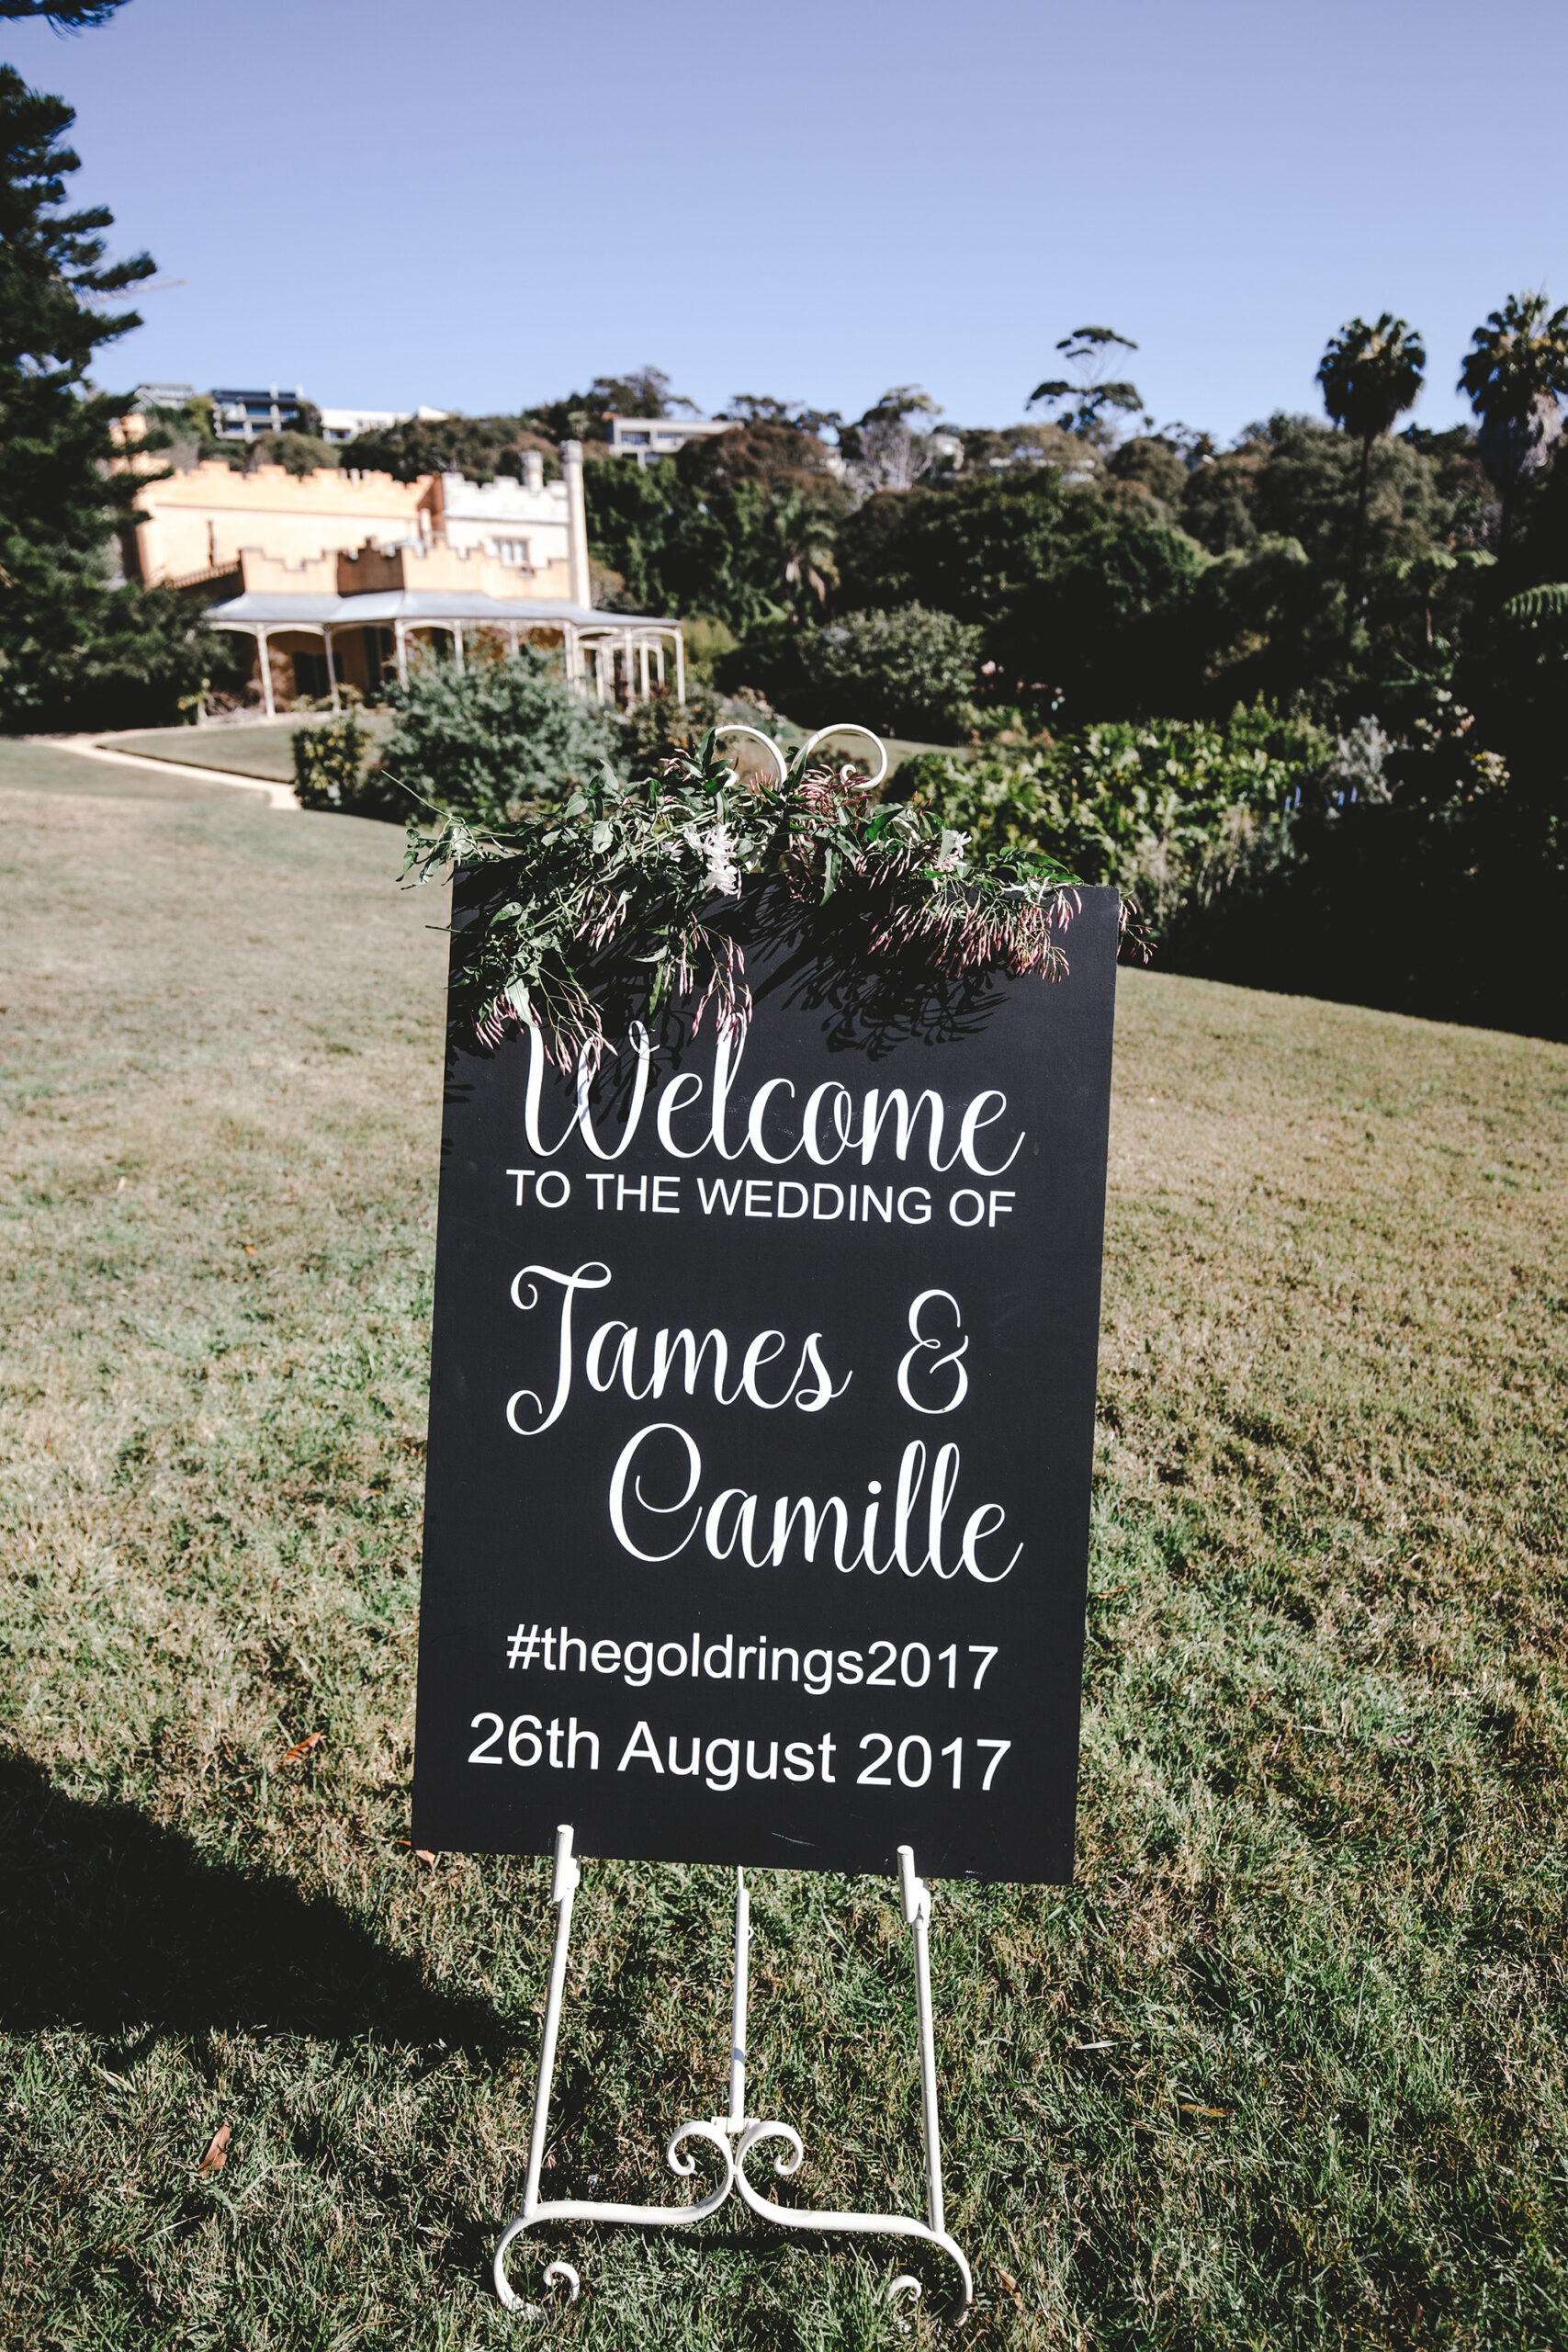 Camille_James_Rustic-Glam-Wedding_Pure-Image-Photography_SBS_018